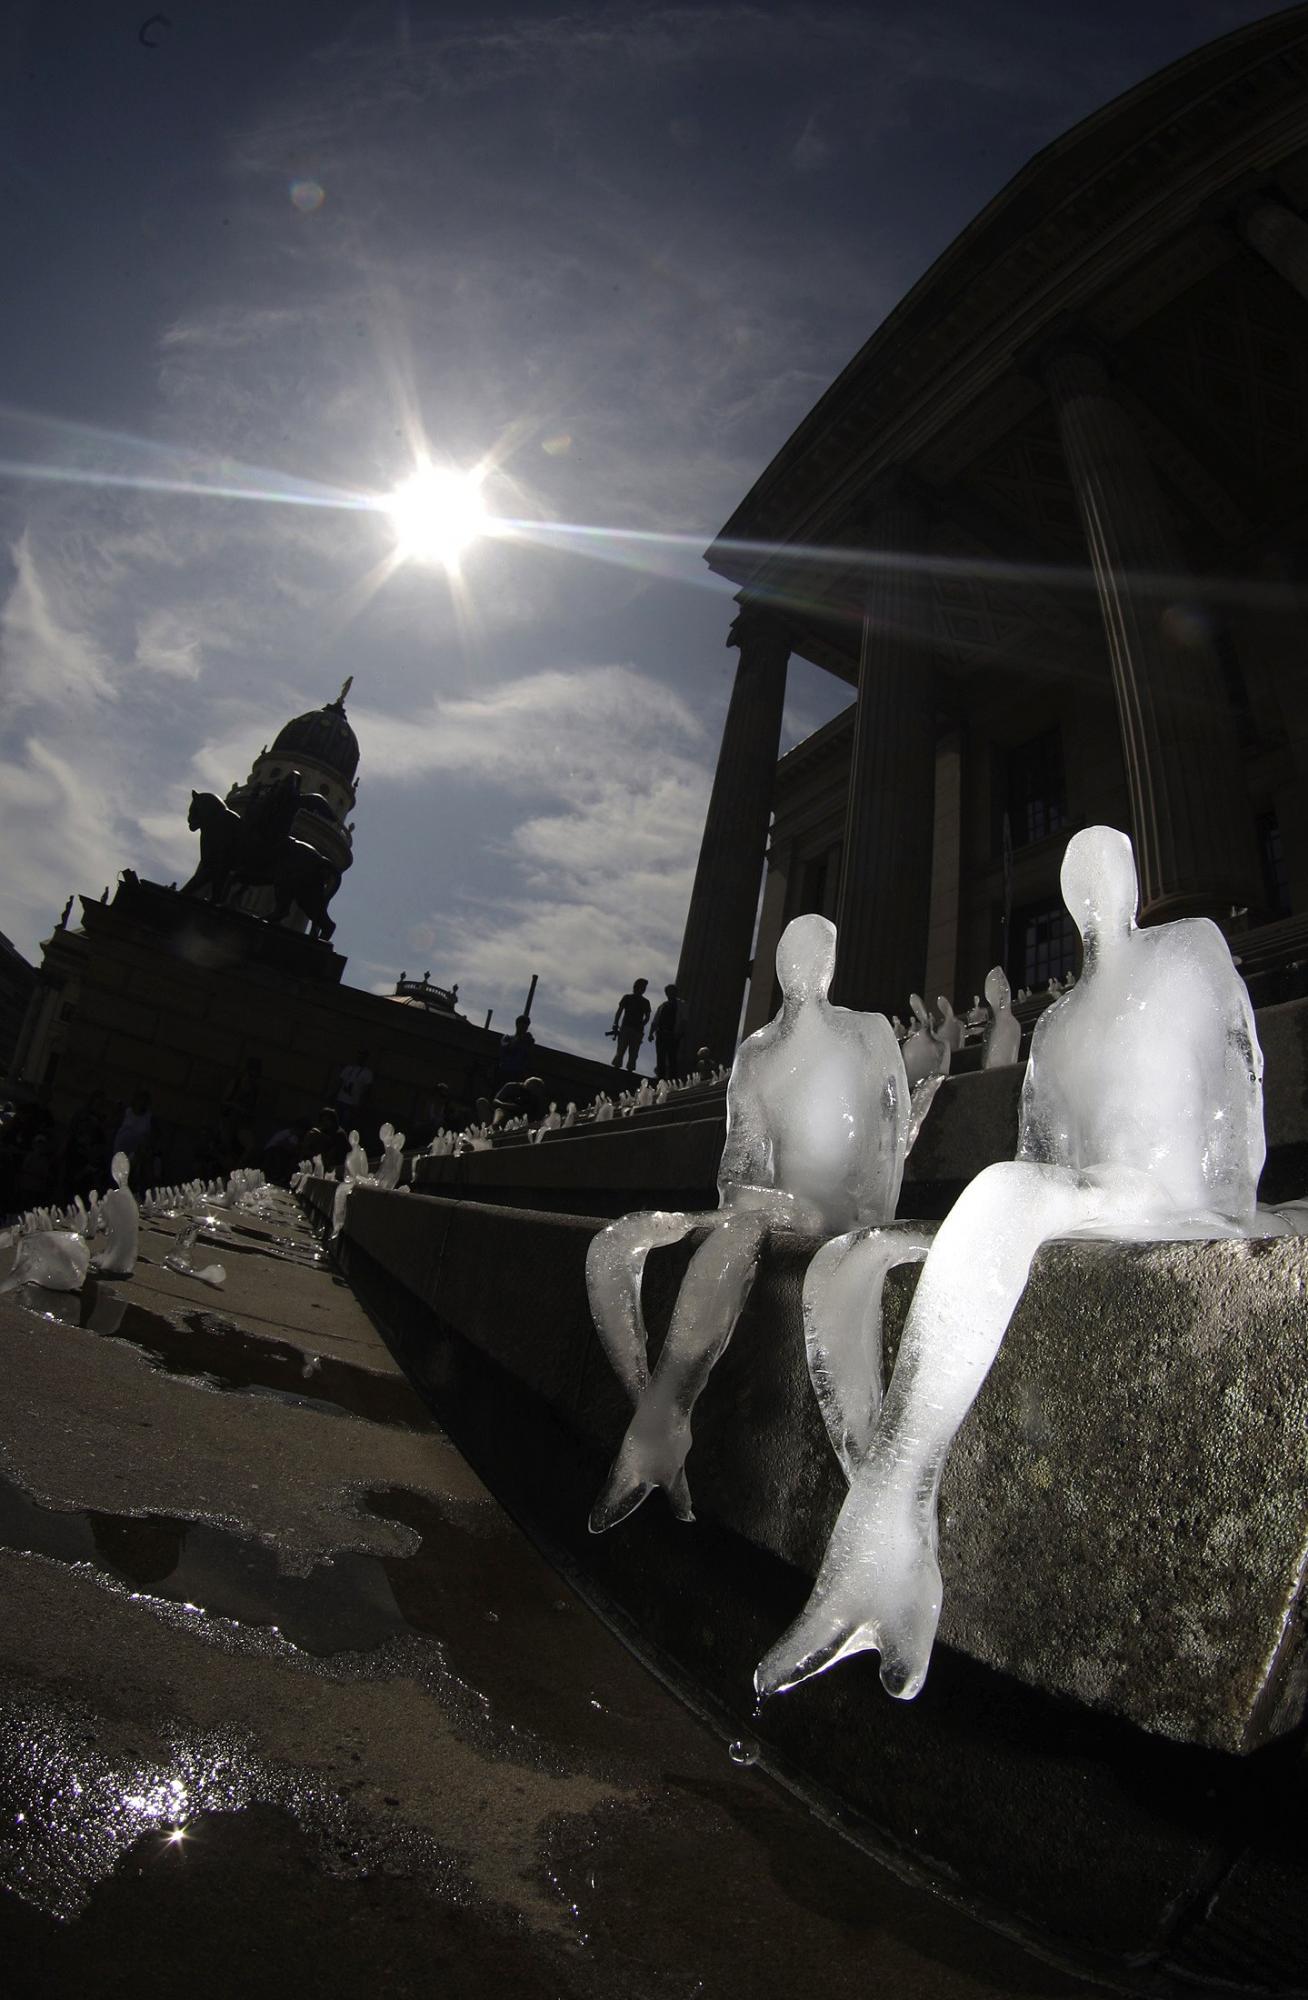 Ice sculptures in the shape of humans